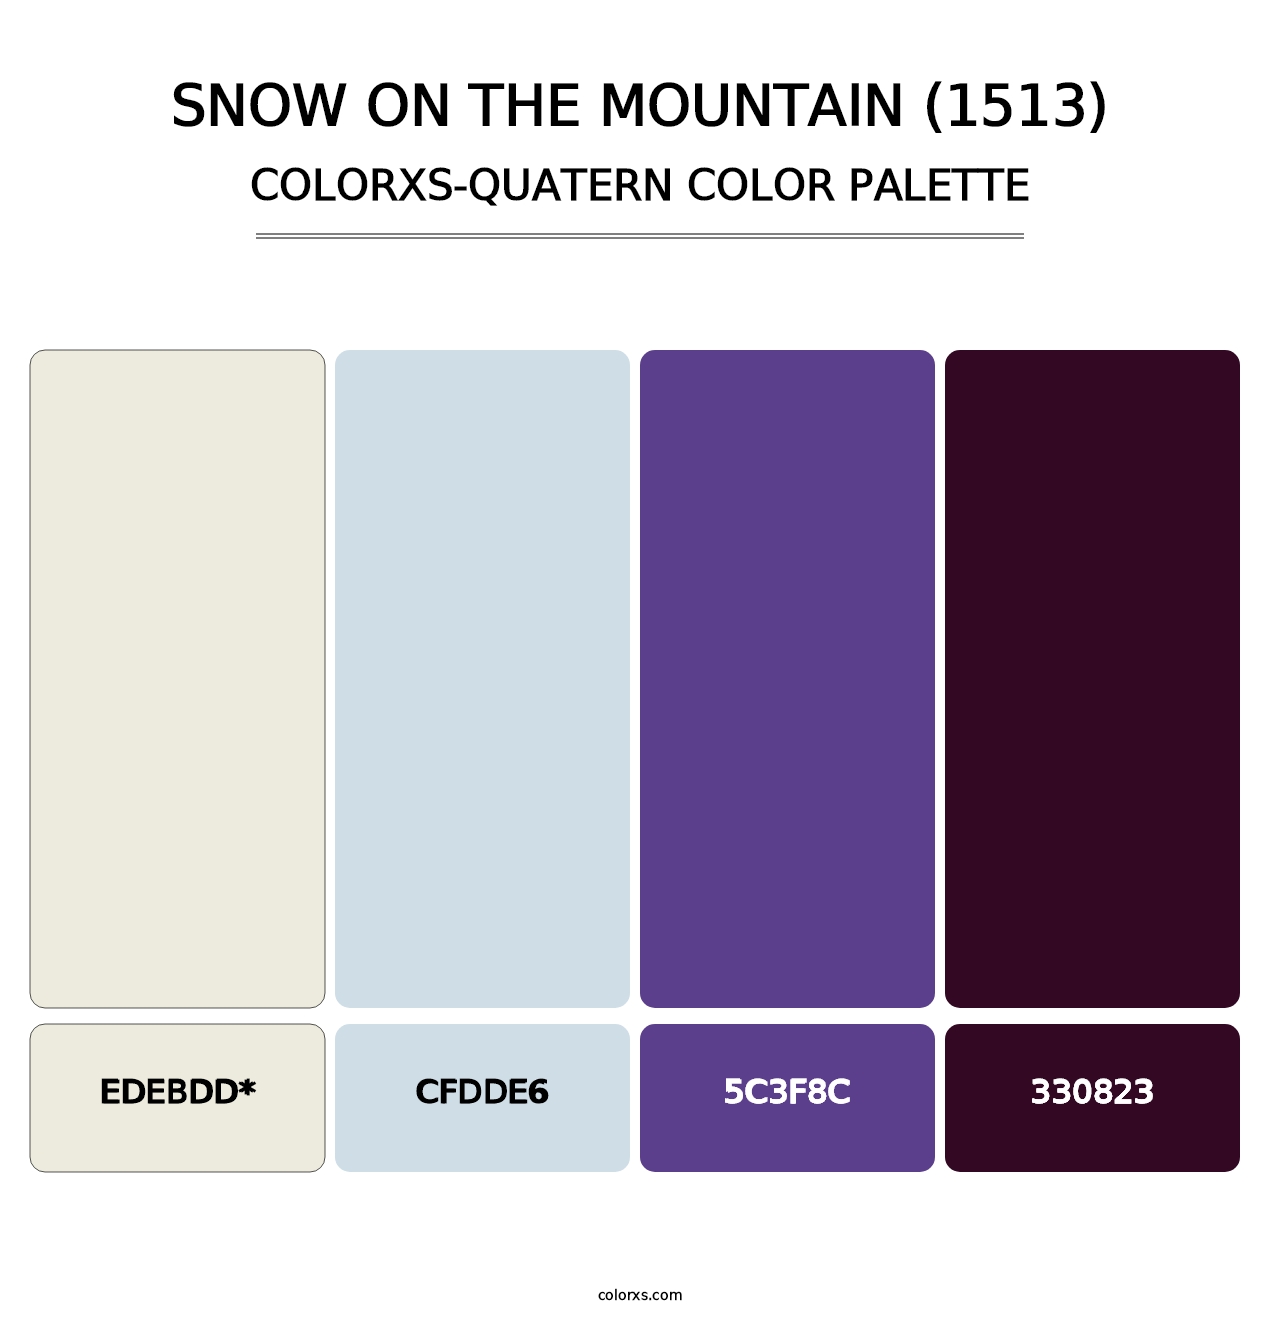 Snow on the Mountain (1513) - Colorxs Quatern Palette